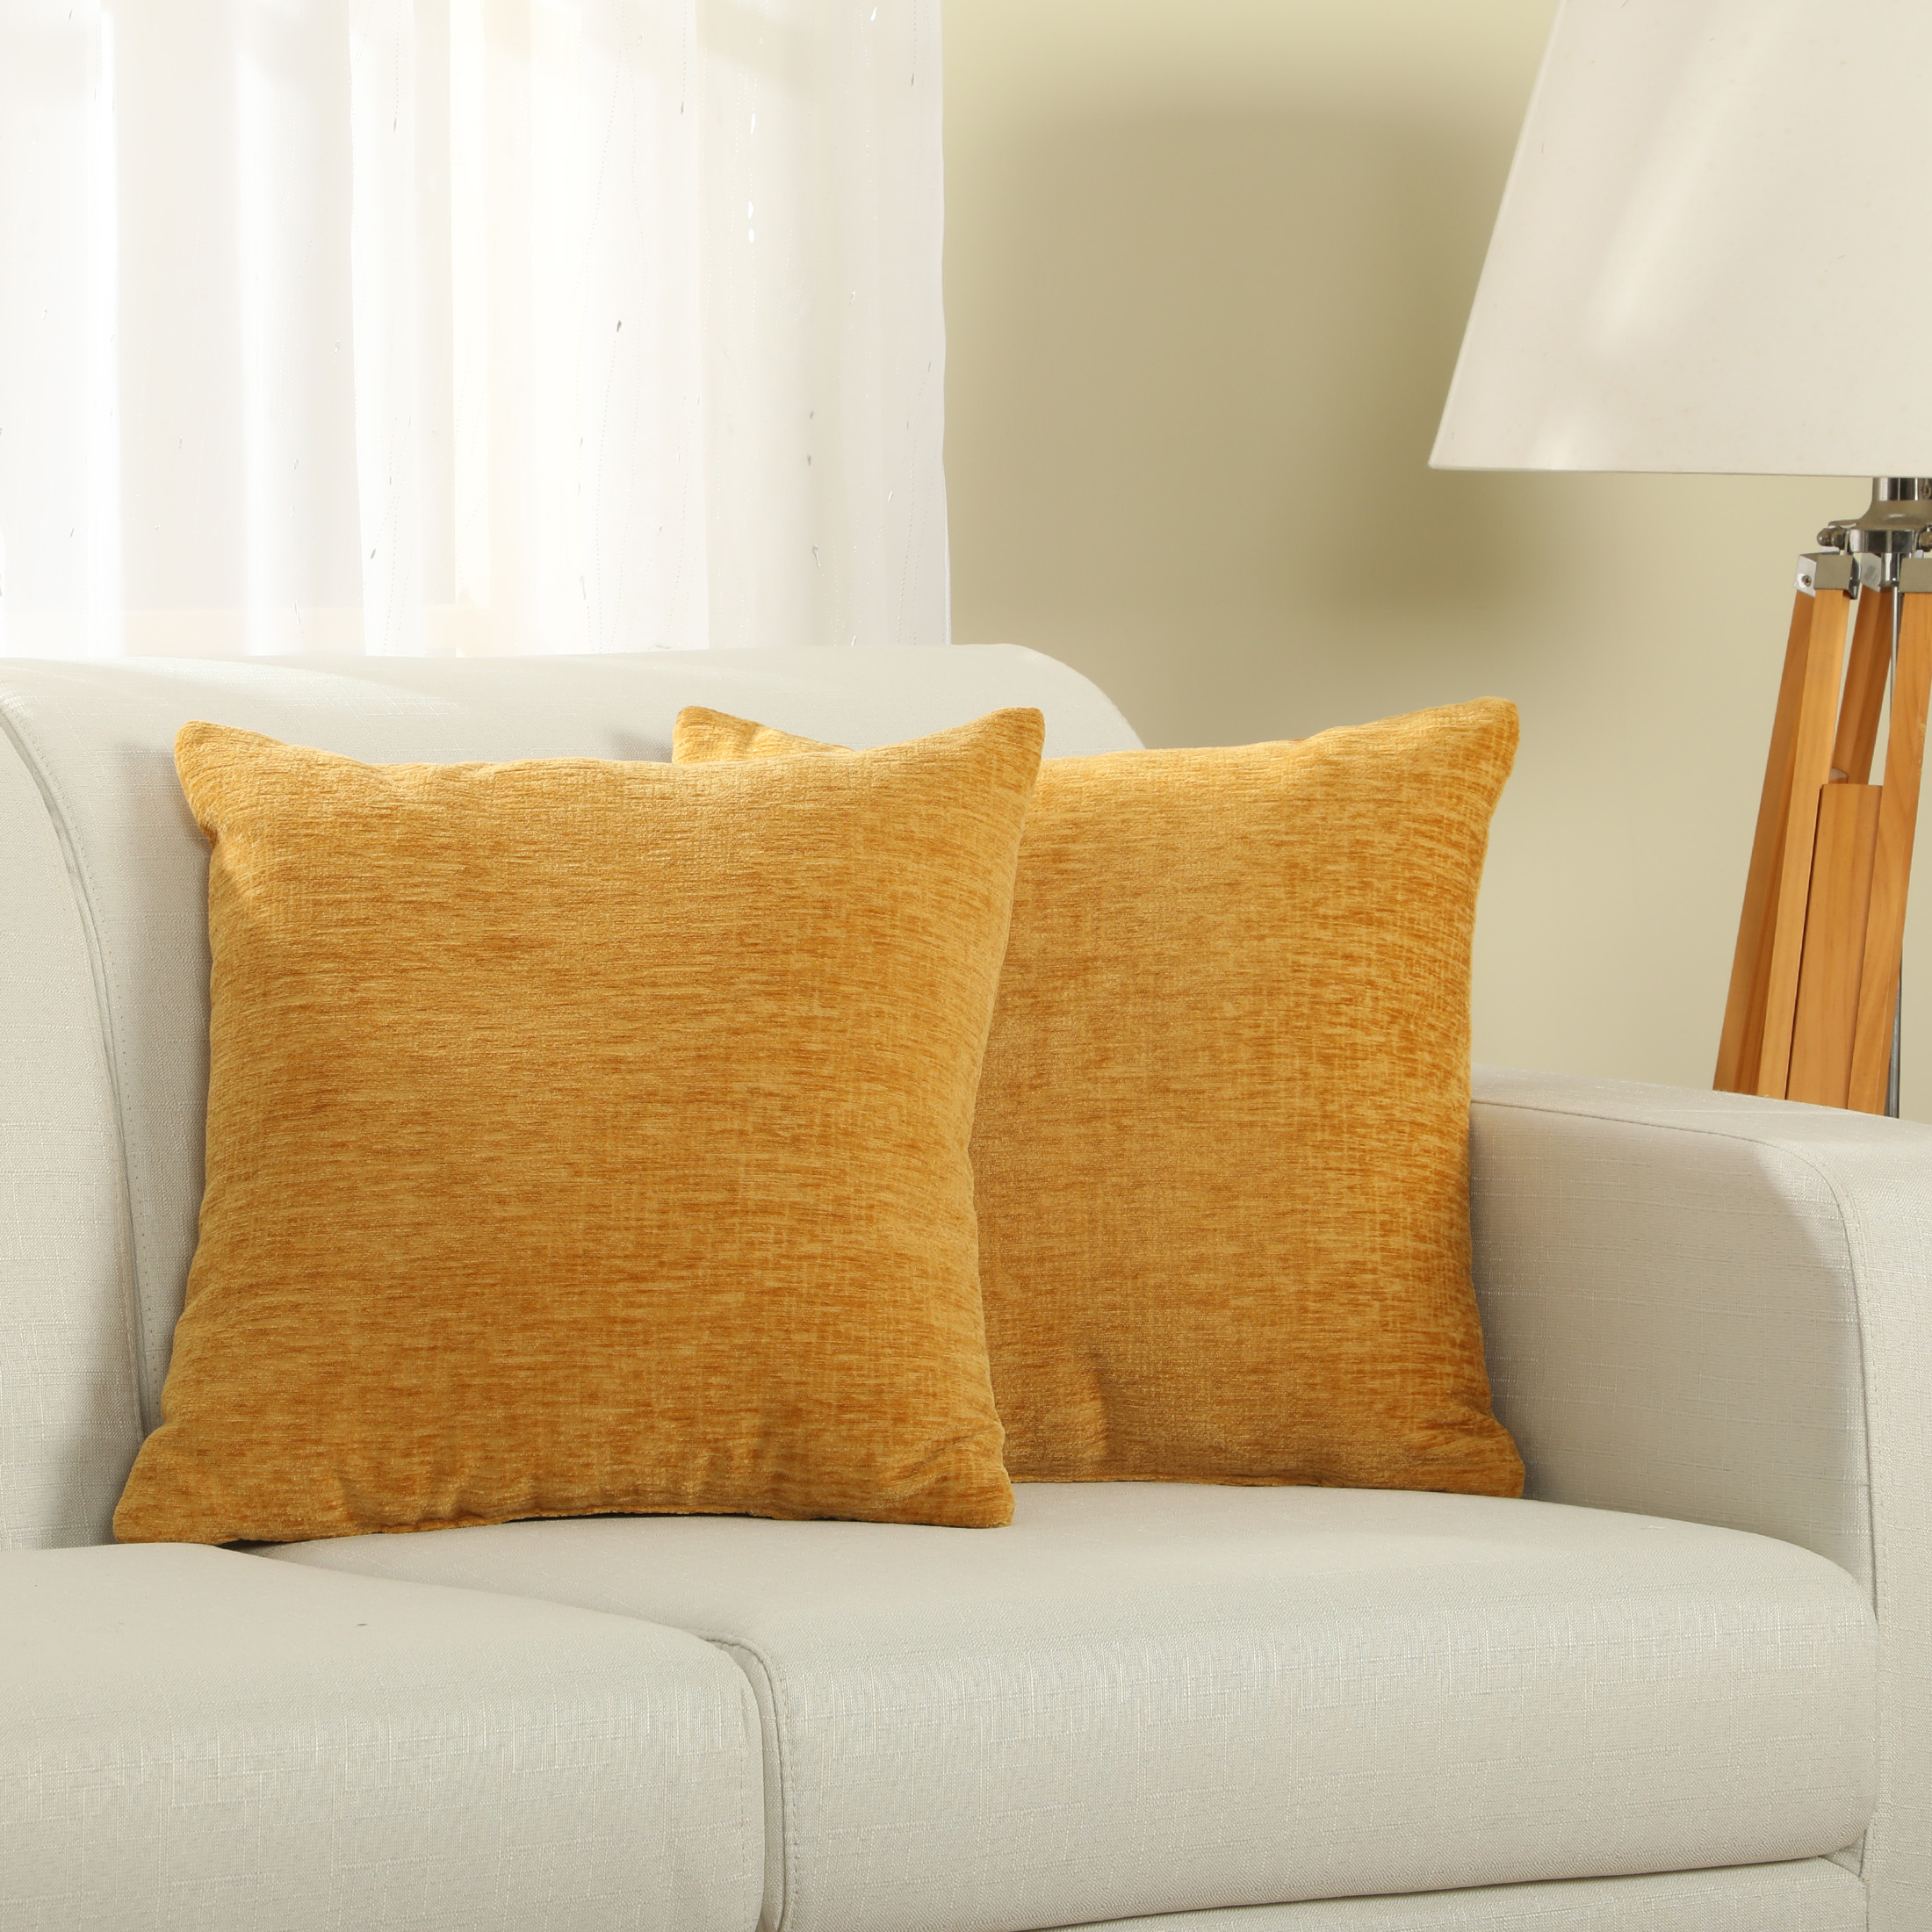 Mainstays Chenille Yellow Pillow 18''x18'', 2 Pack - image 4 of 5